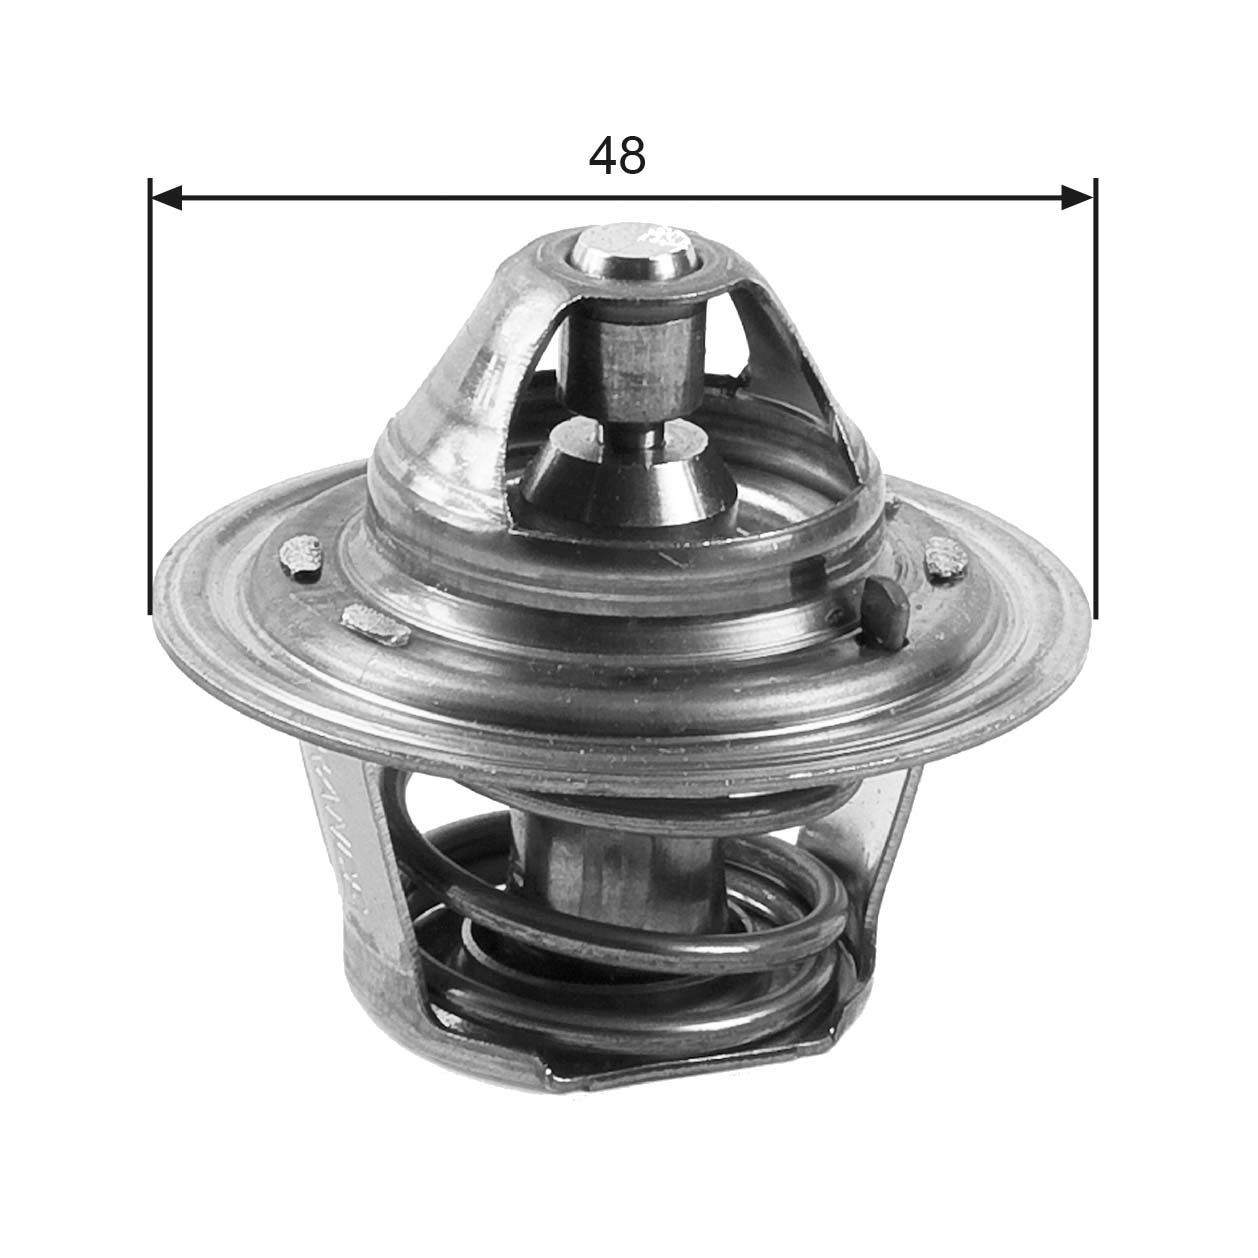 GATES TH27188G1 Engine thermostat Opening Temperature: 88°C, with gaskets/seals, without housing